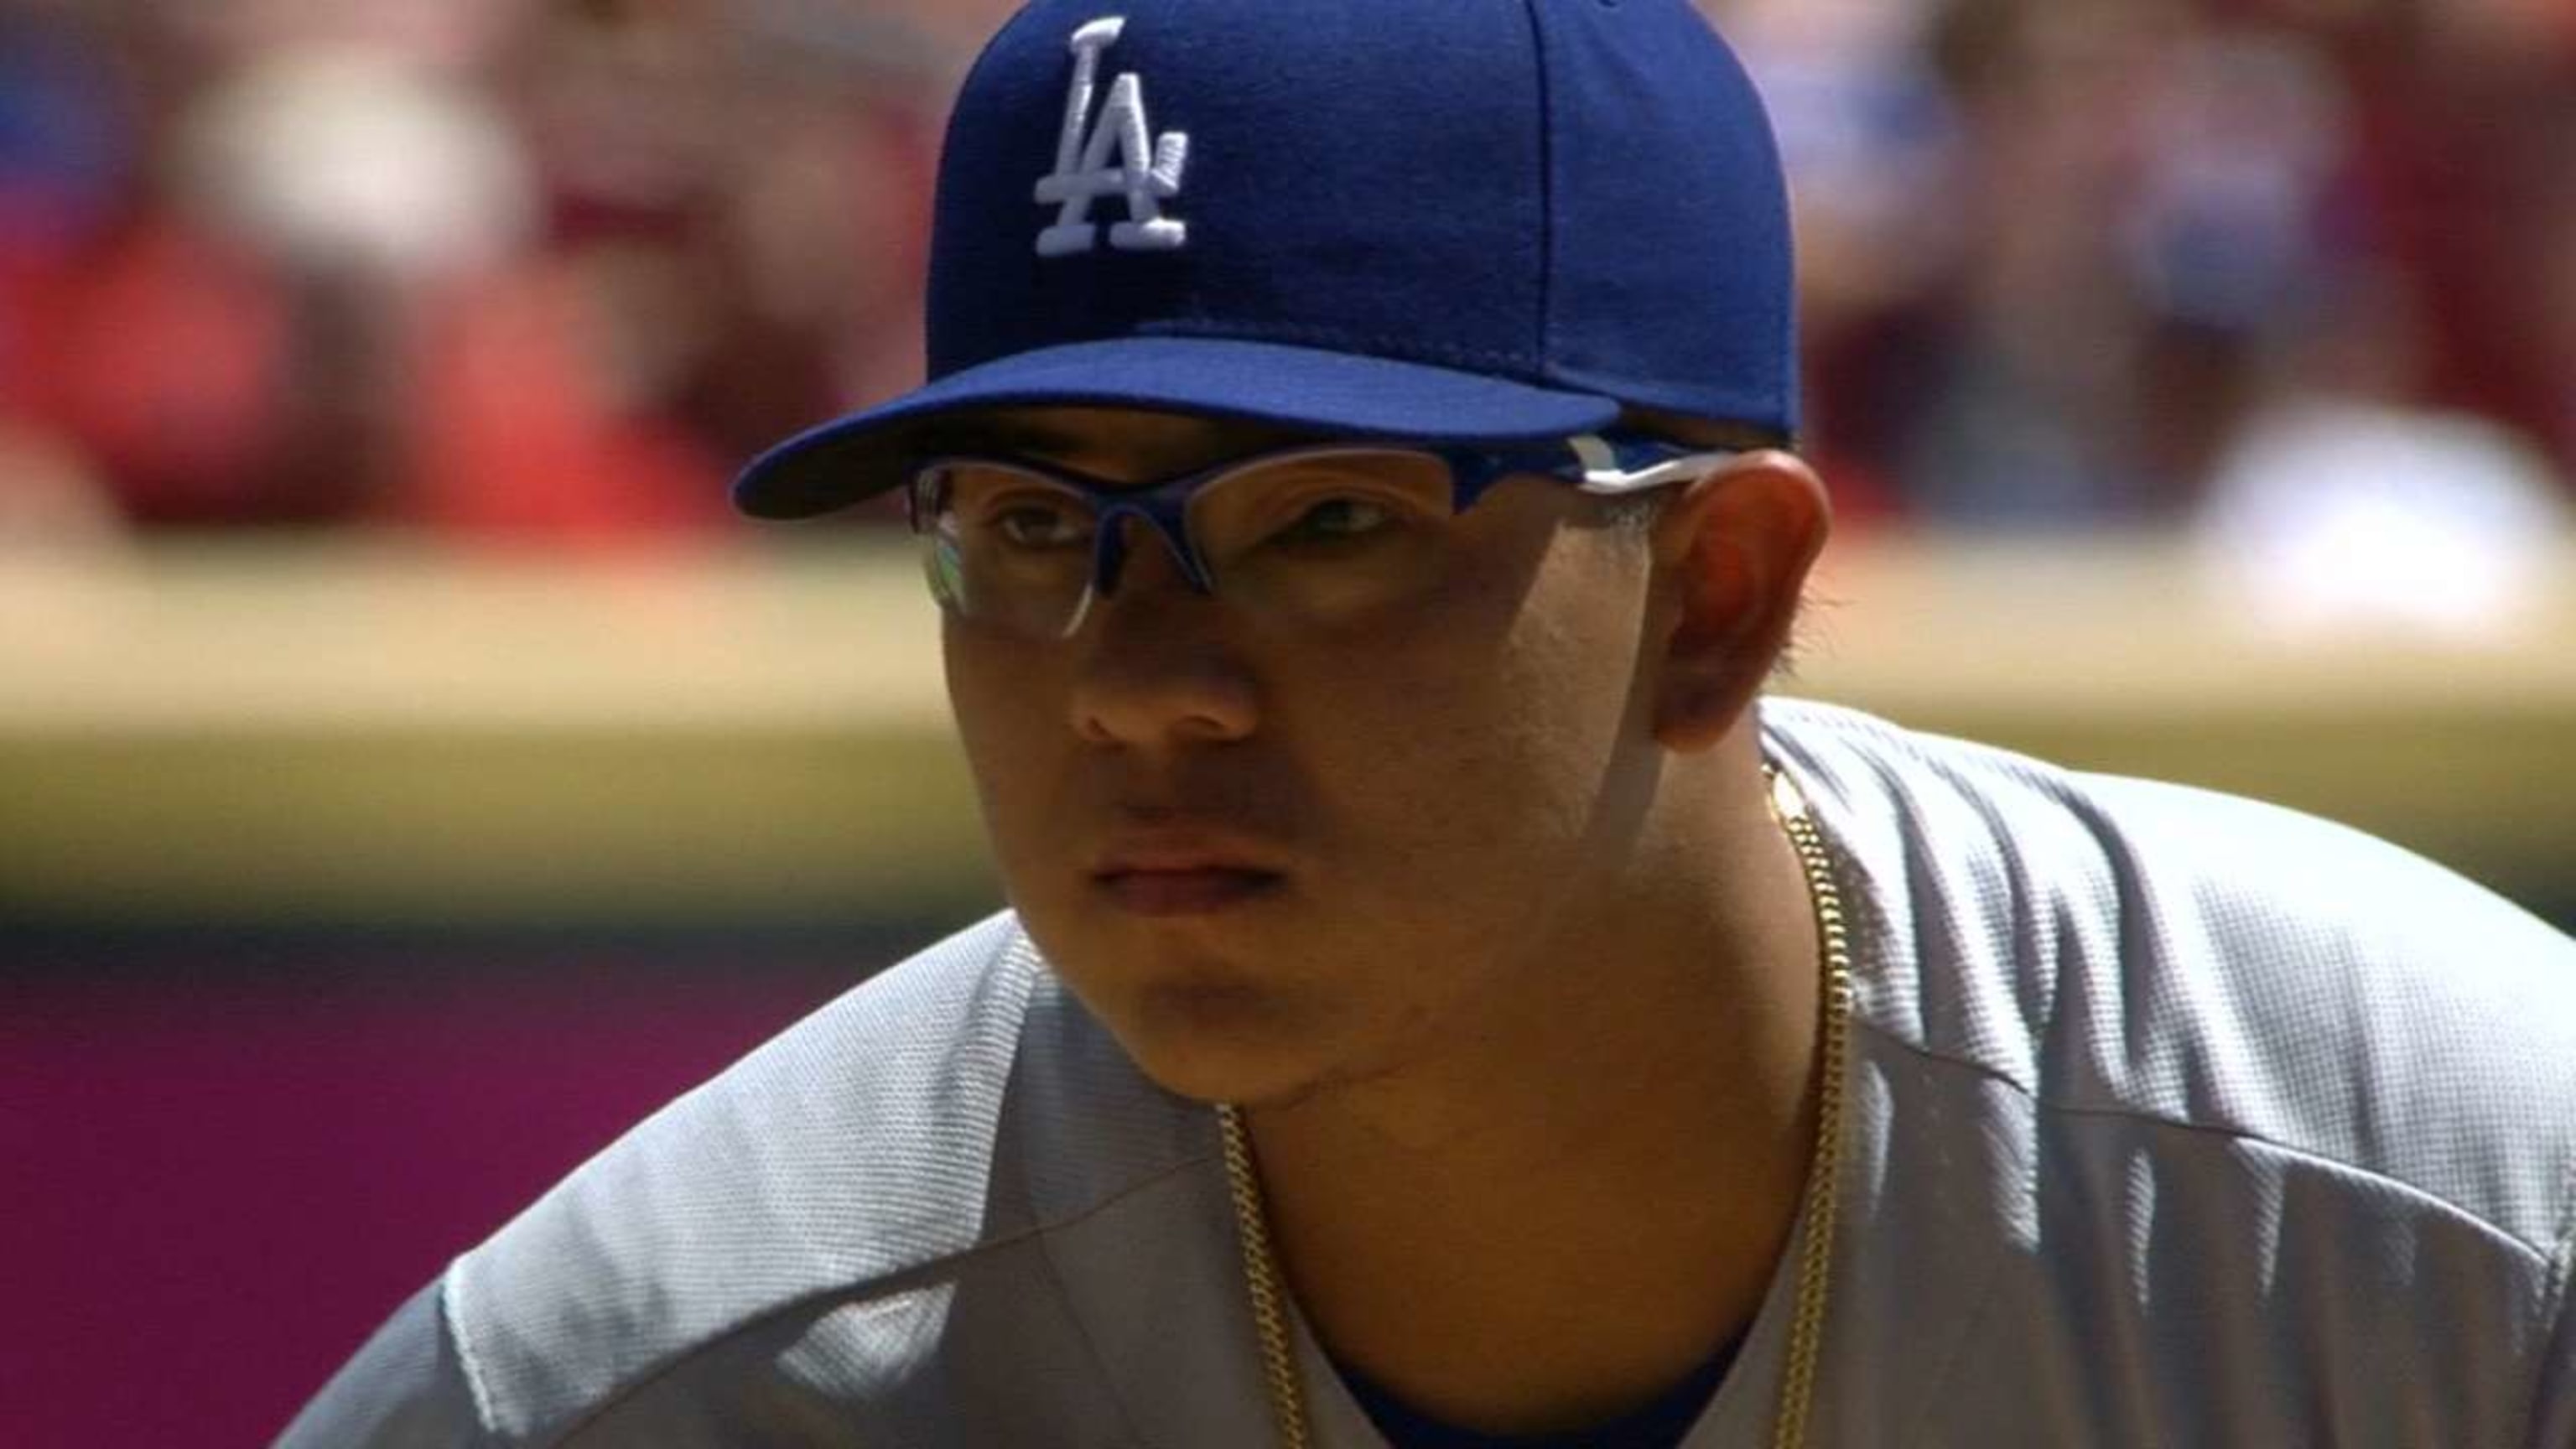 Roberts: Urias was best option in 8th, still slated to start Game 4